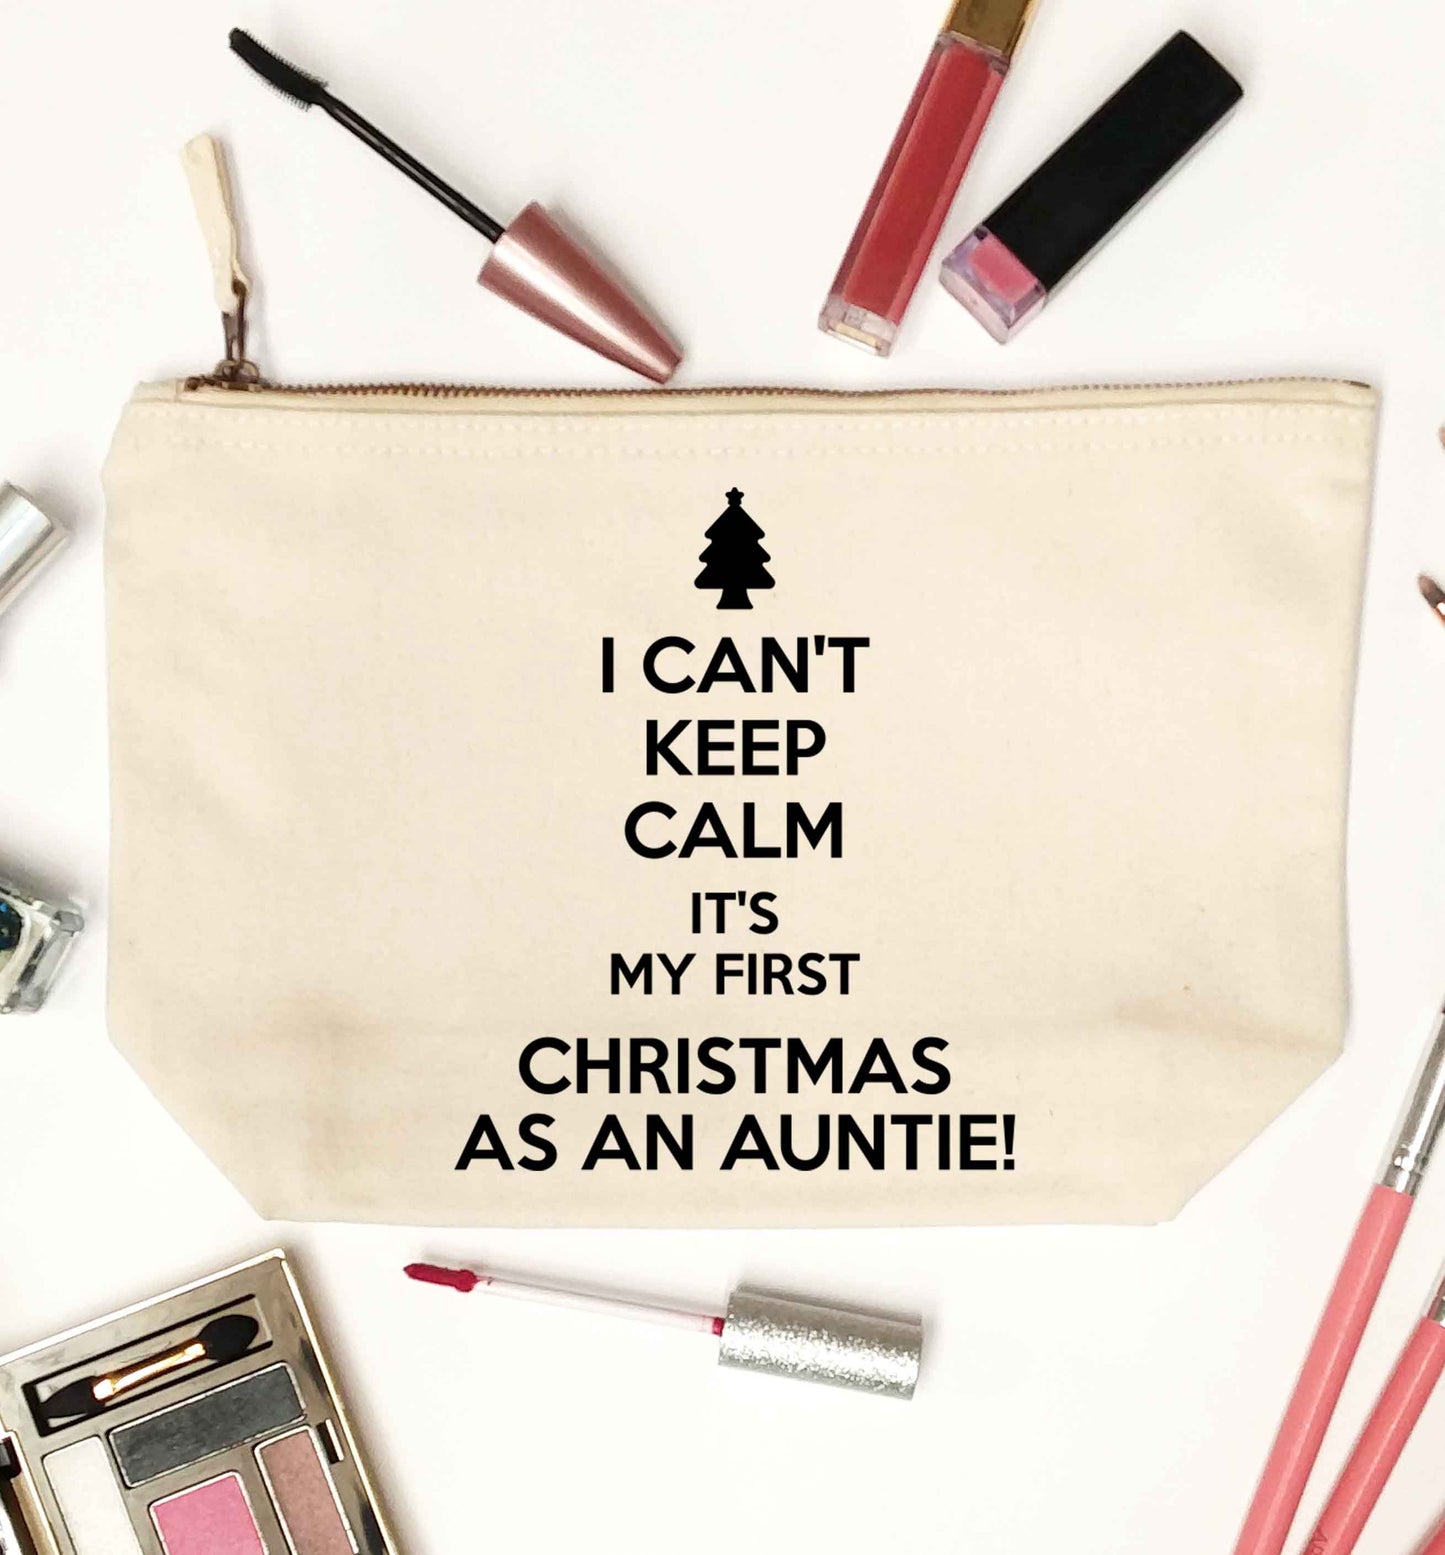 I can't keep calm it's my first Christmas as an auntie! natural makeup bag